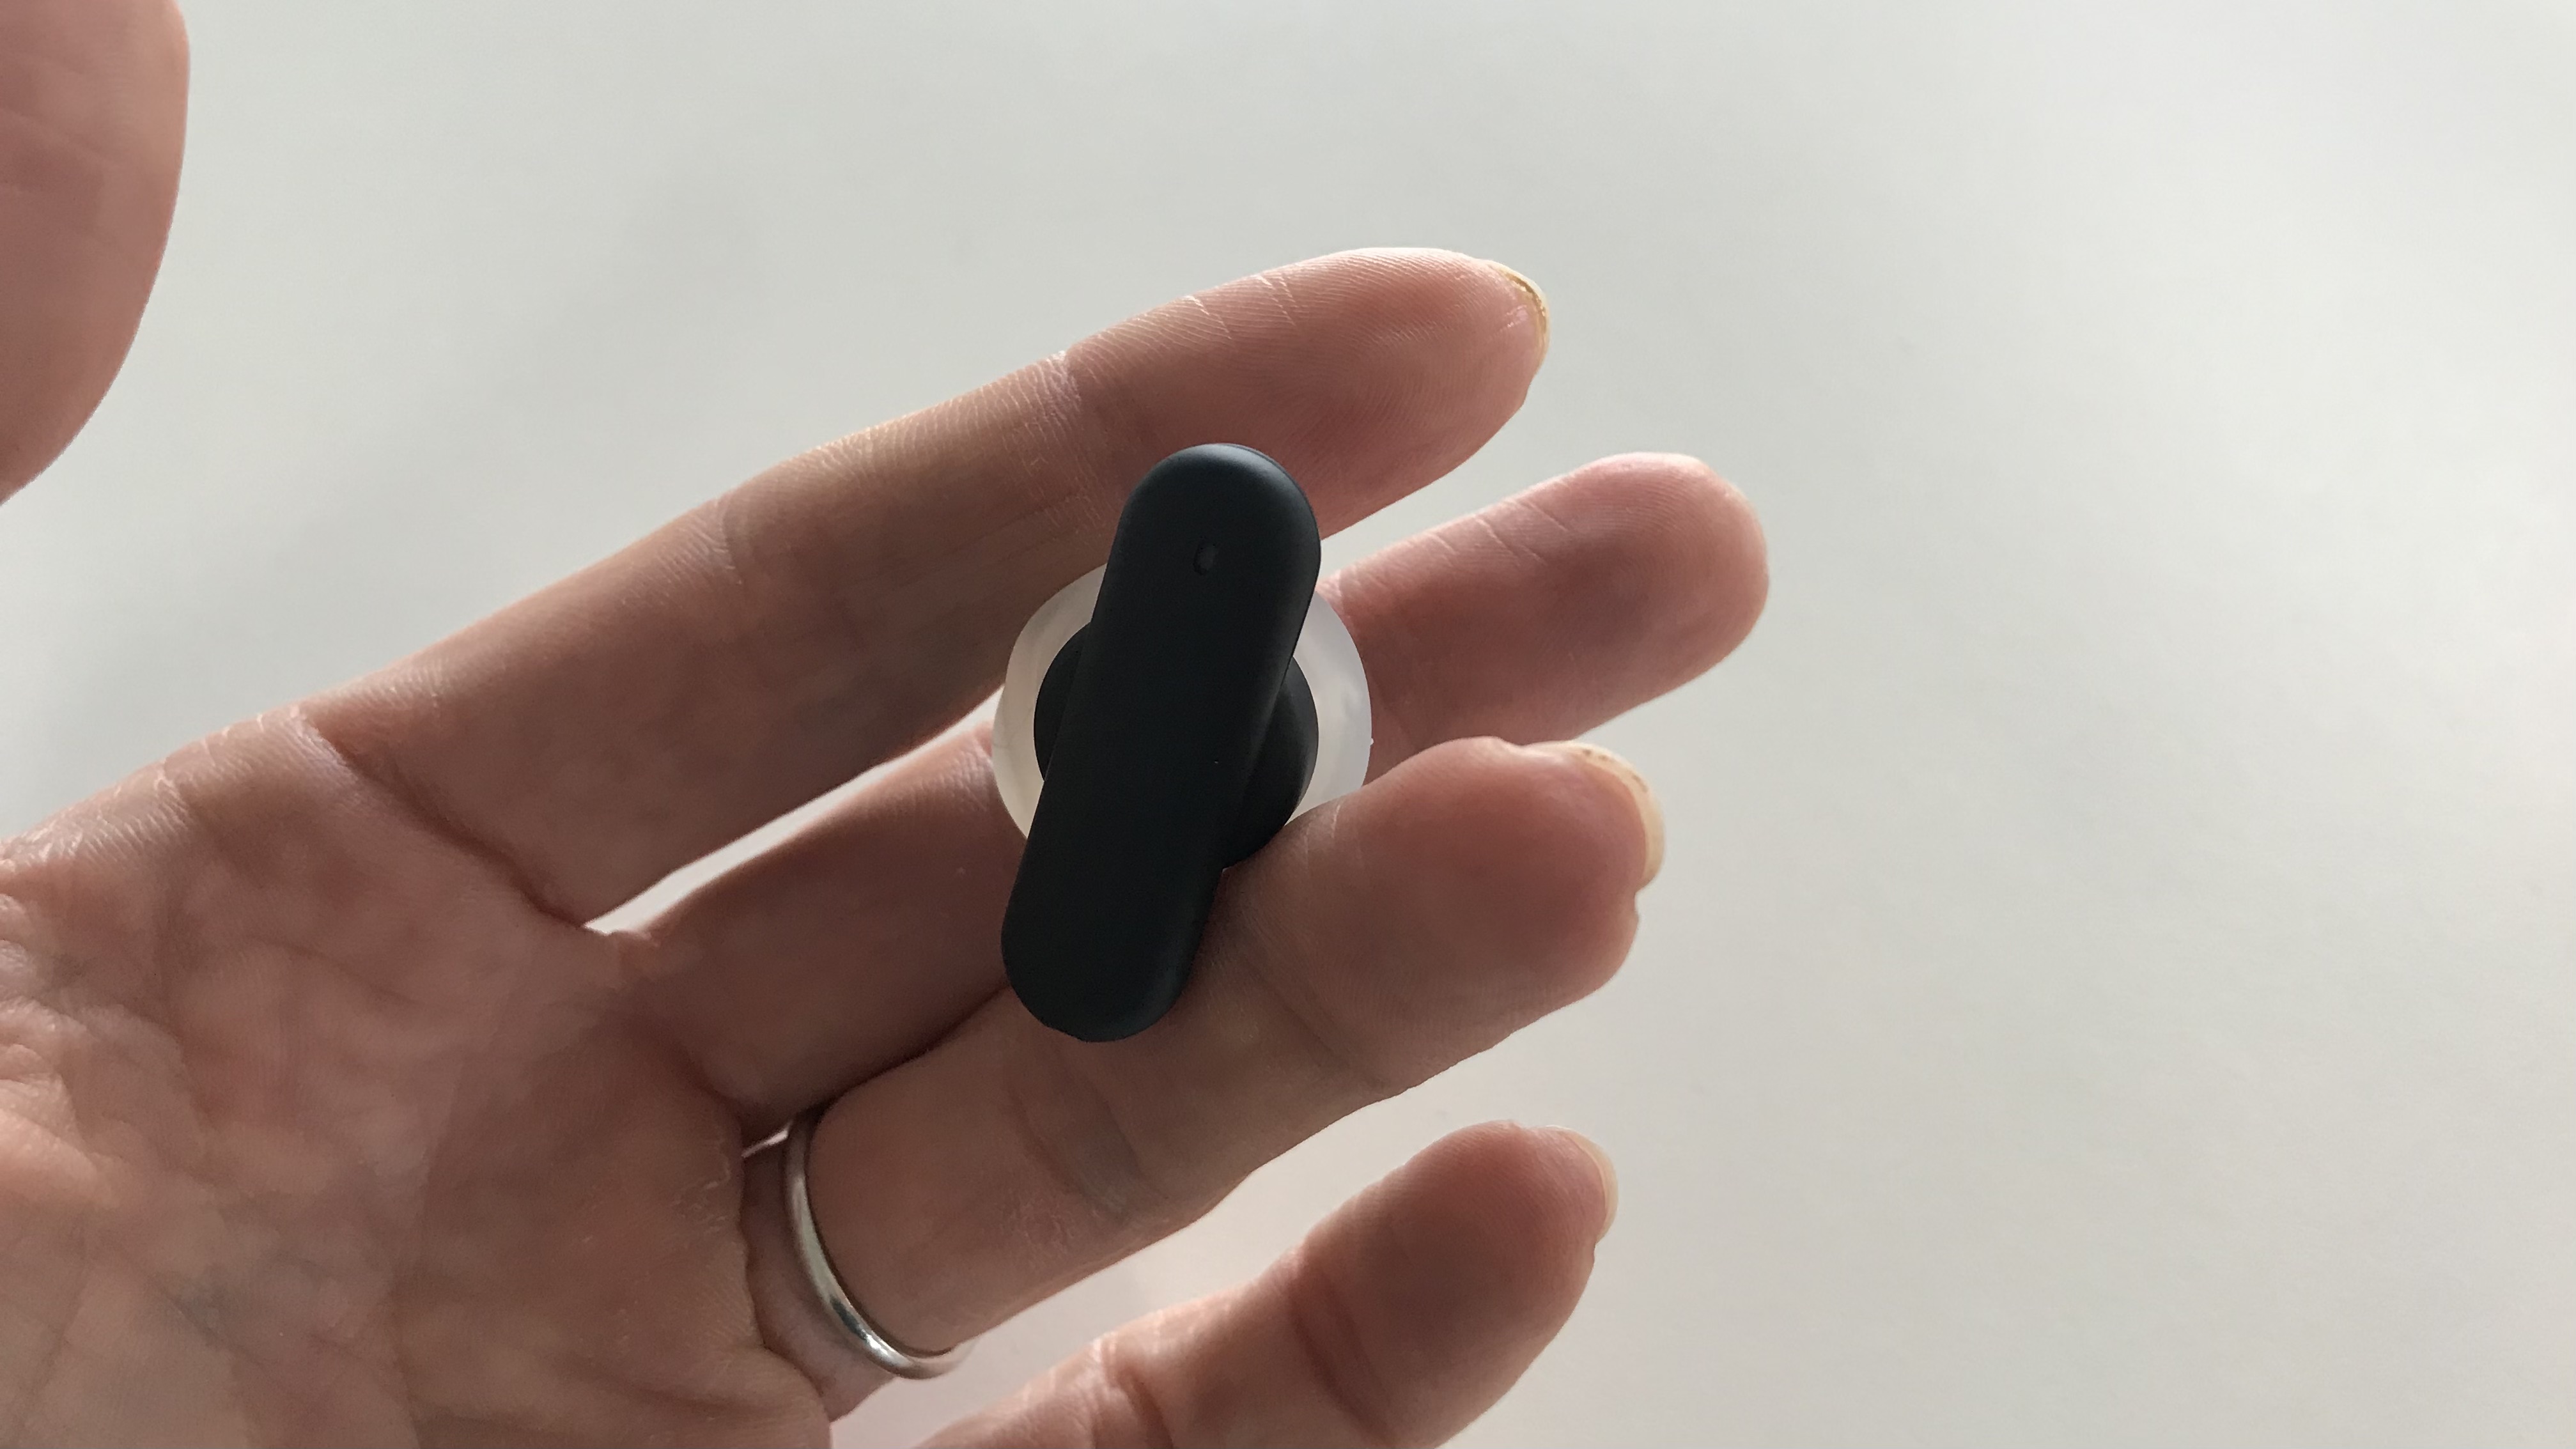 UE Fits earbud held in a hand